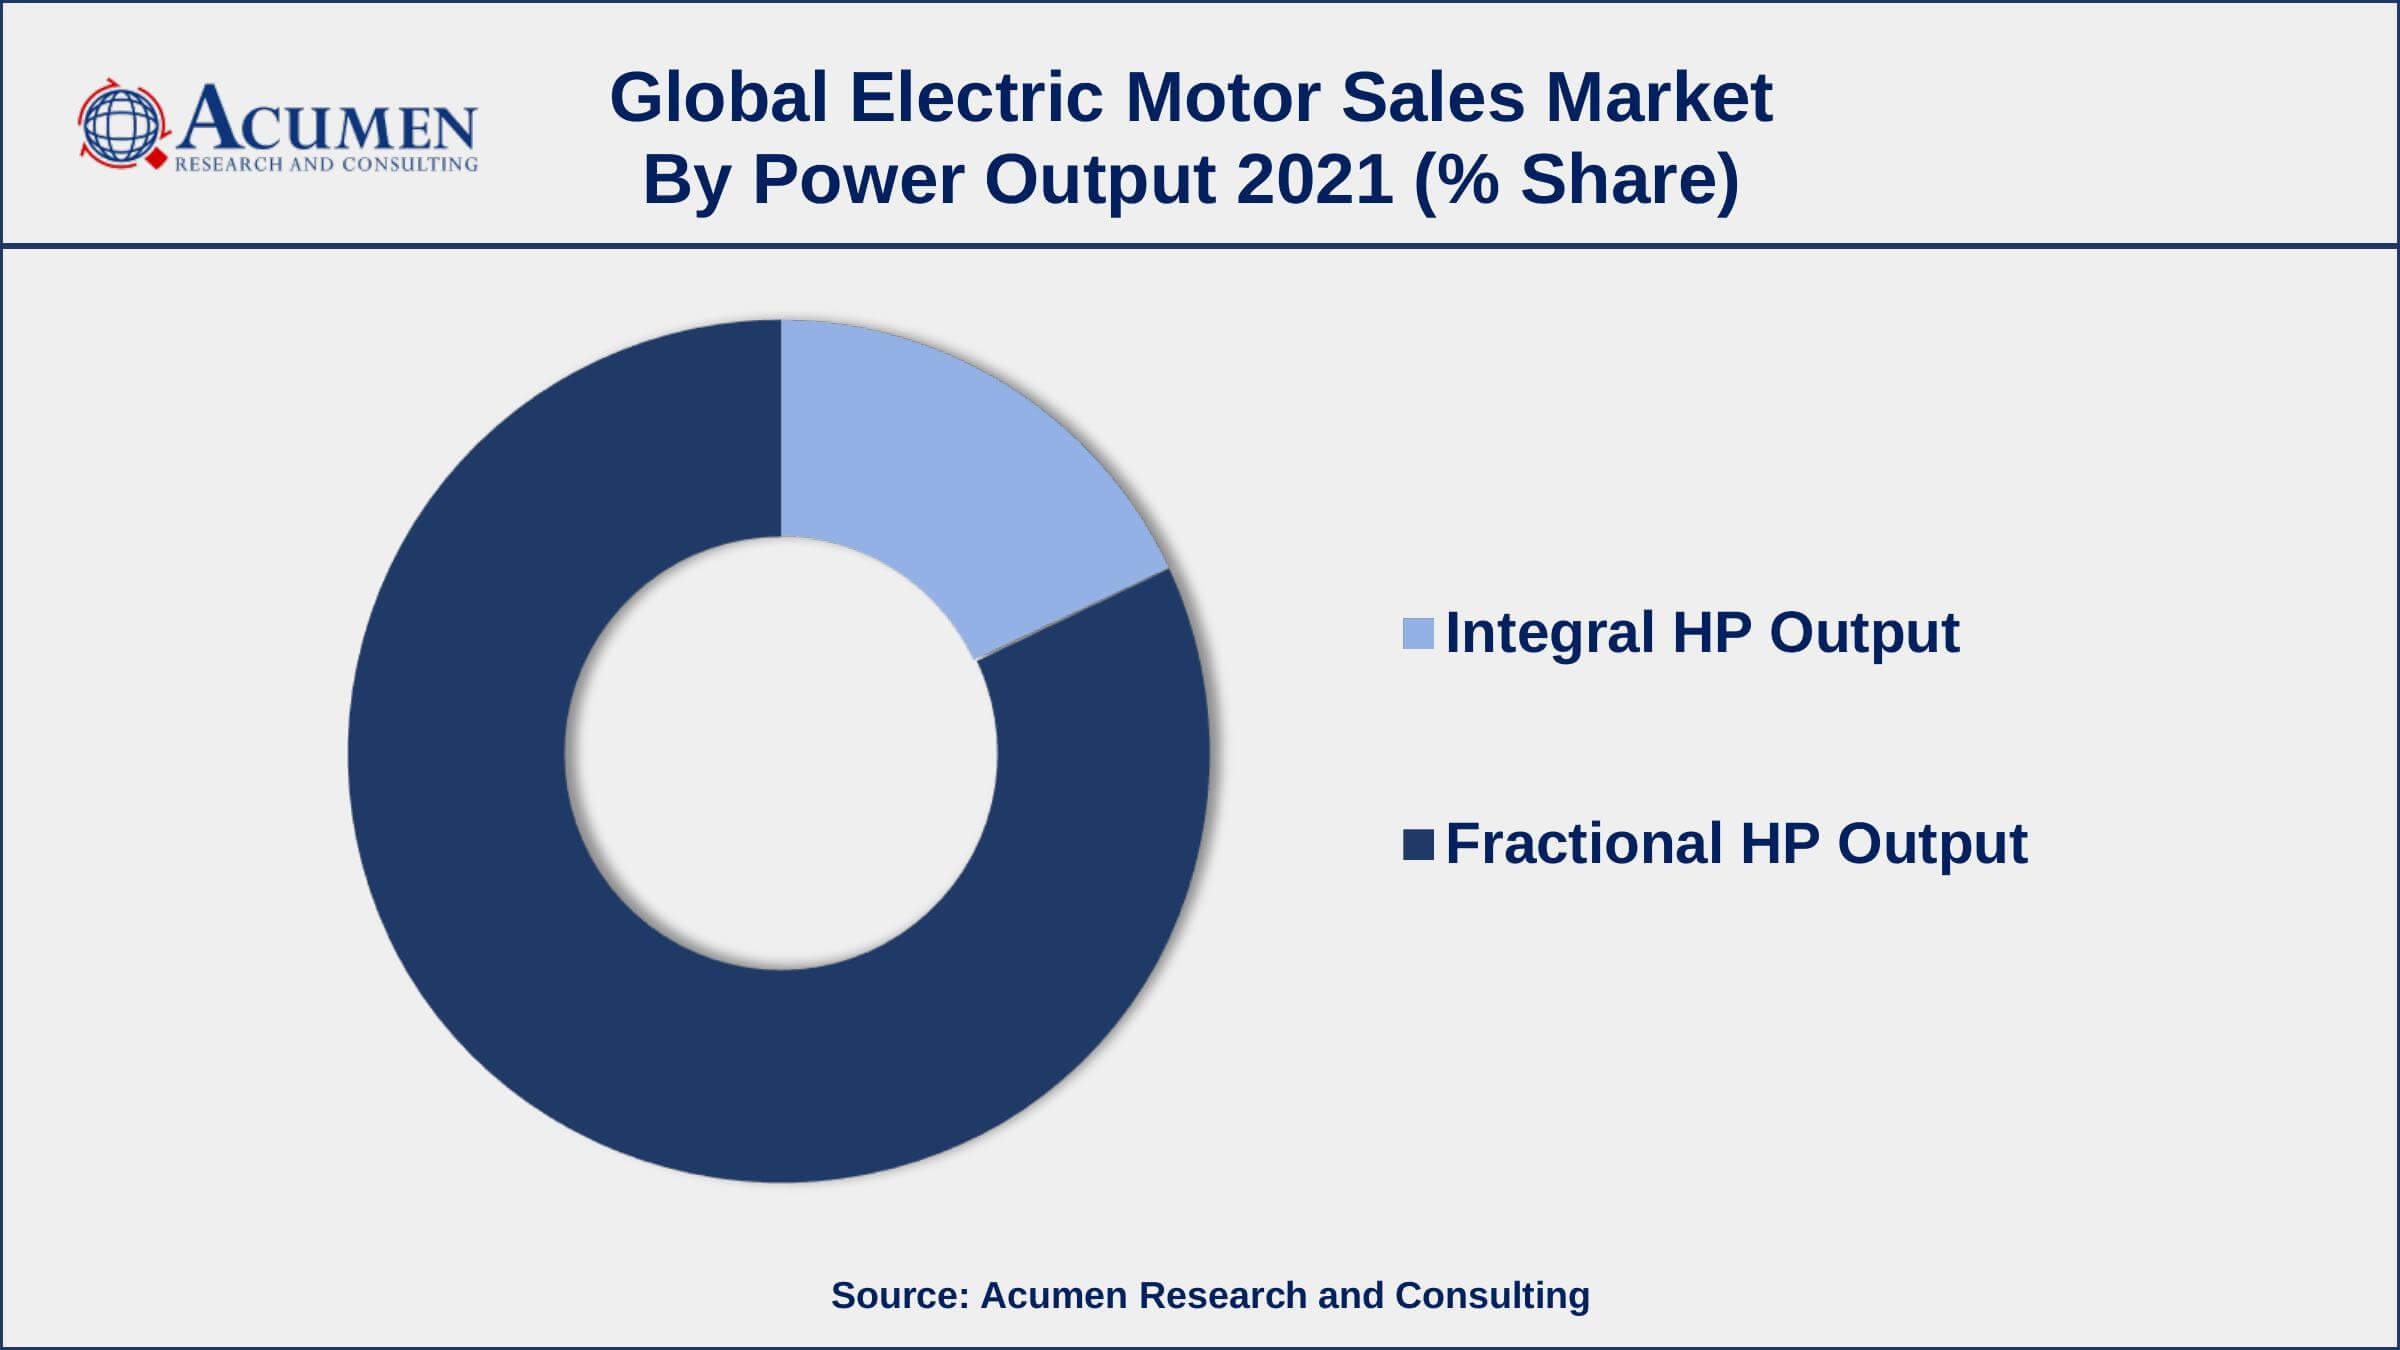 By power output, fractional HP segment engaged more than 82% of the total market share in 2021